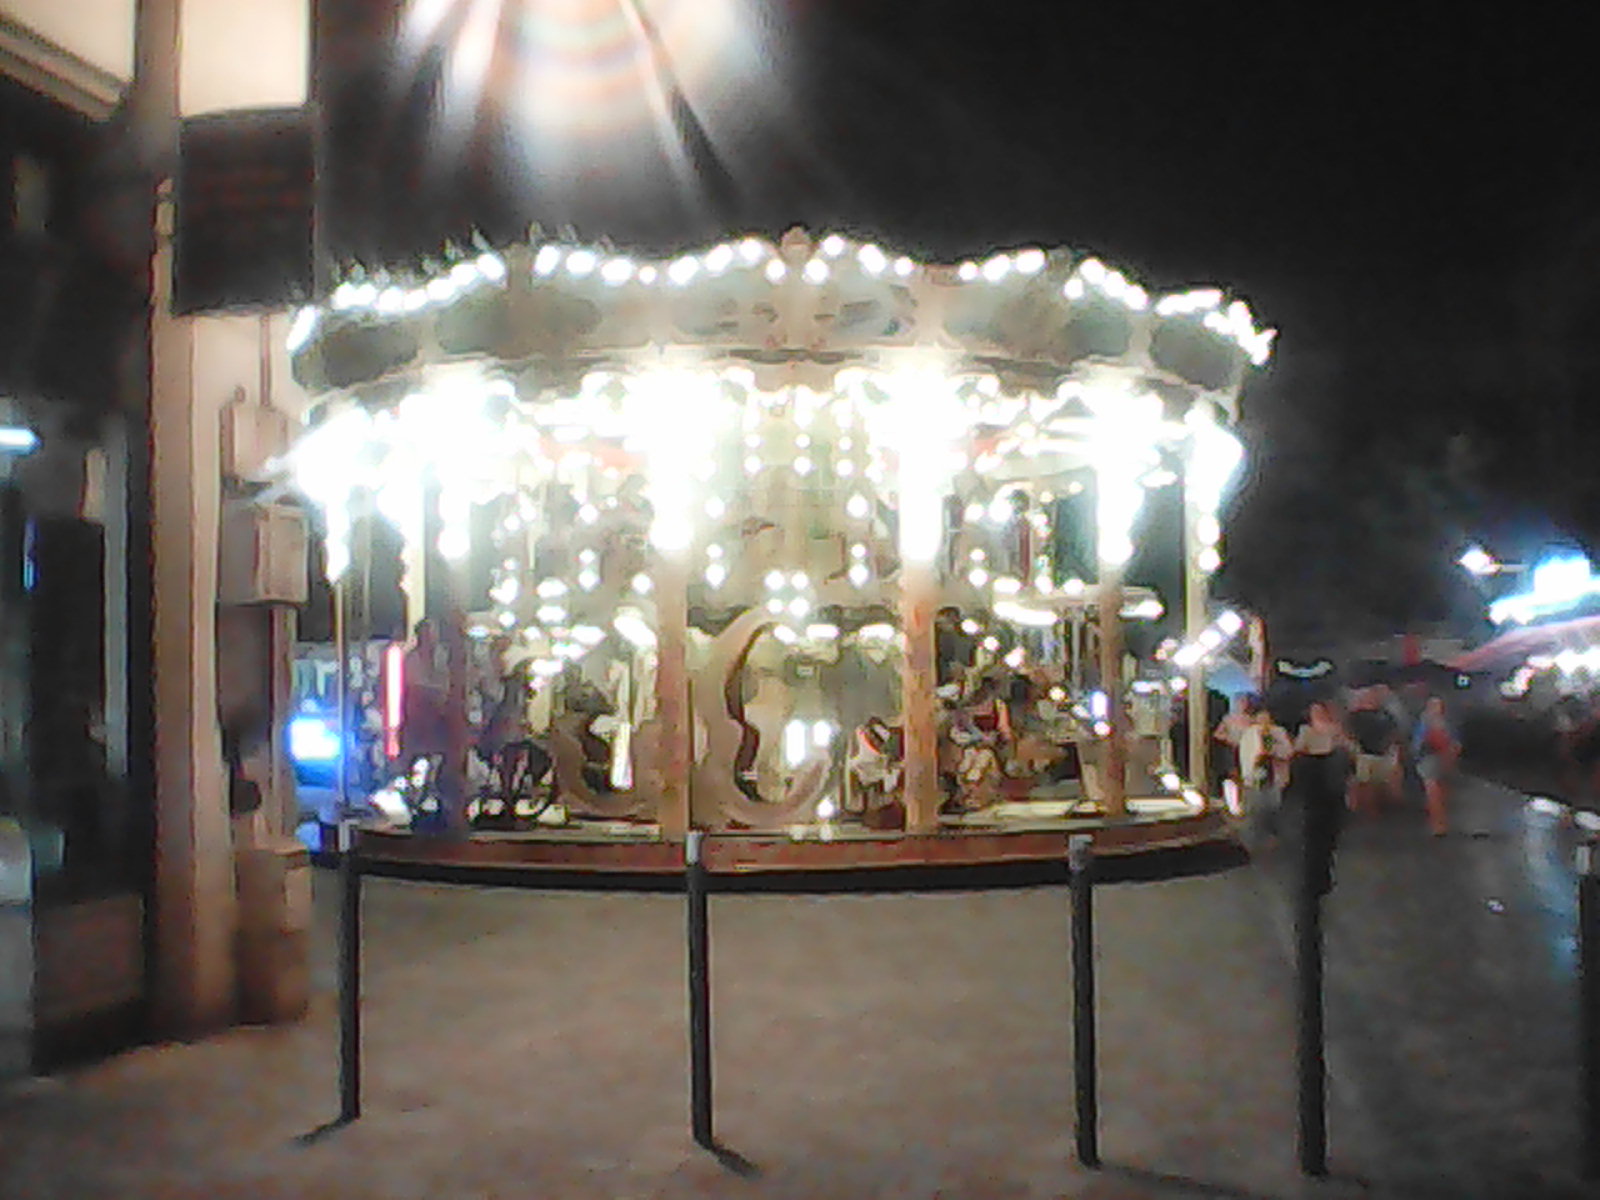 A merry-go-round at night.